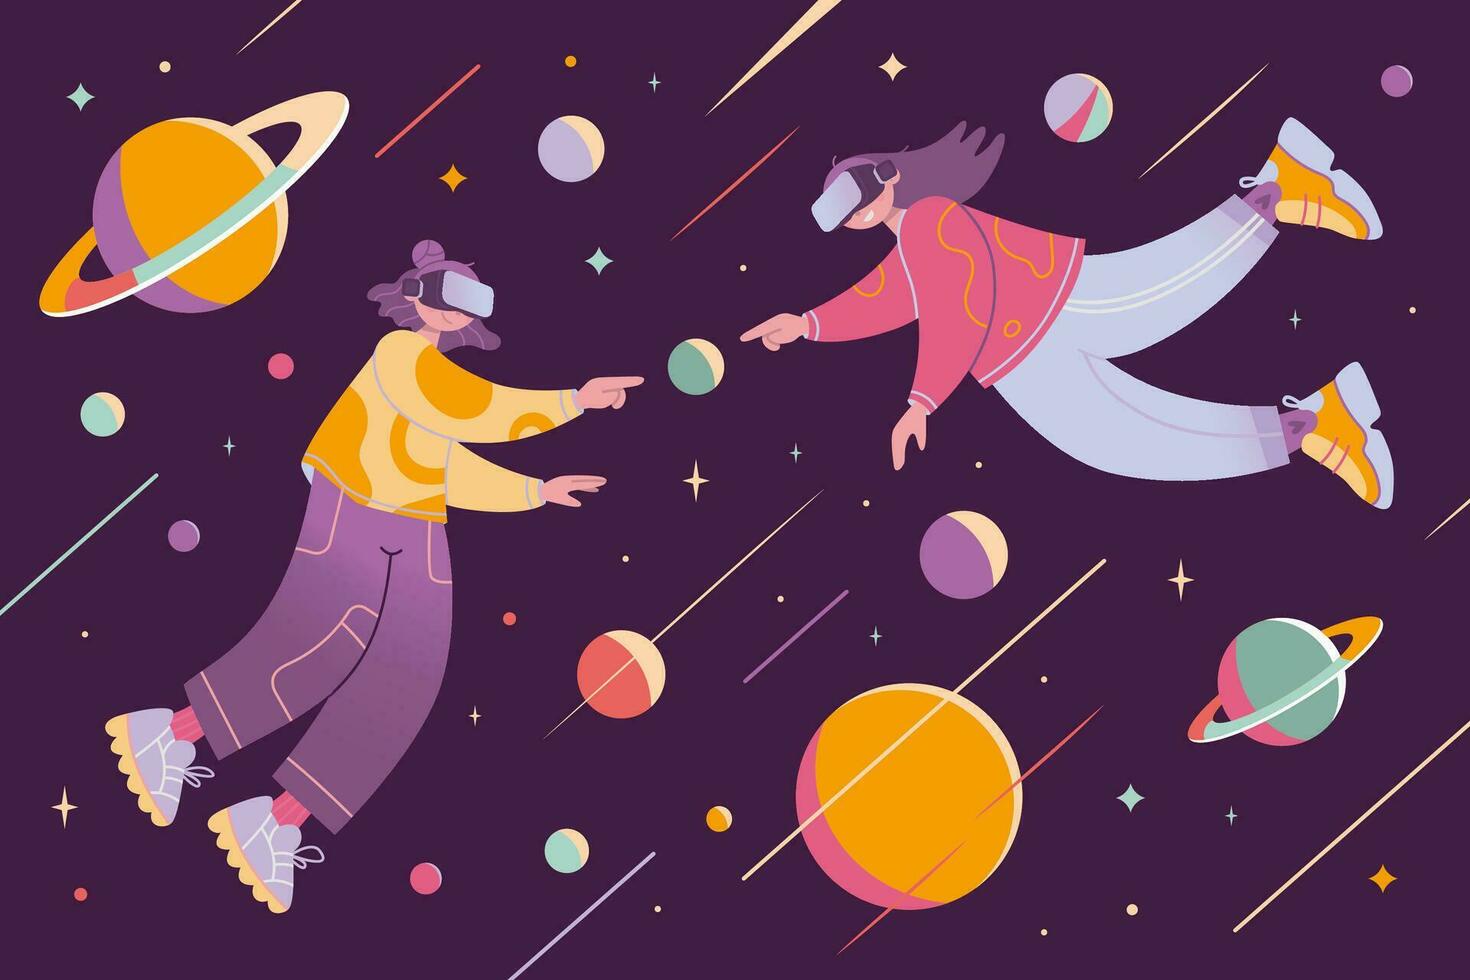 Metaverse or Virtual reality communication concept, cartoon style. Two girls in VR glasses meet, flying in outer space with planets and stars. Trendy vector illustration, hand drawn, flat